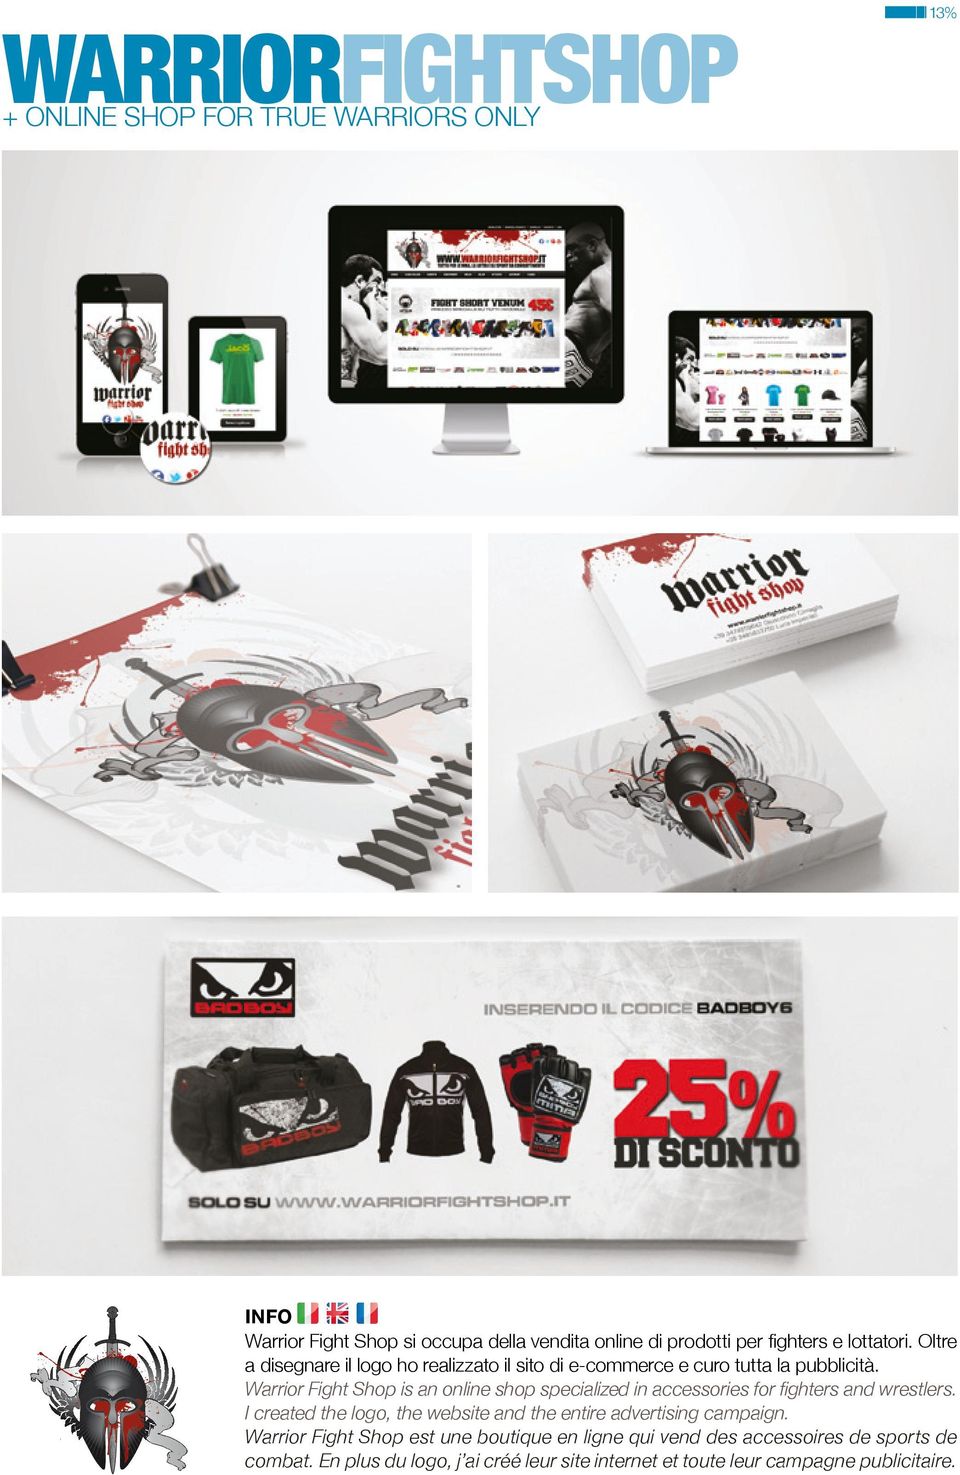 Warrior Fight Shop is an online shop specialized in accessories for fighters and wrestlers.